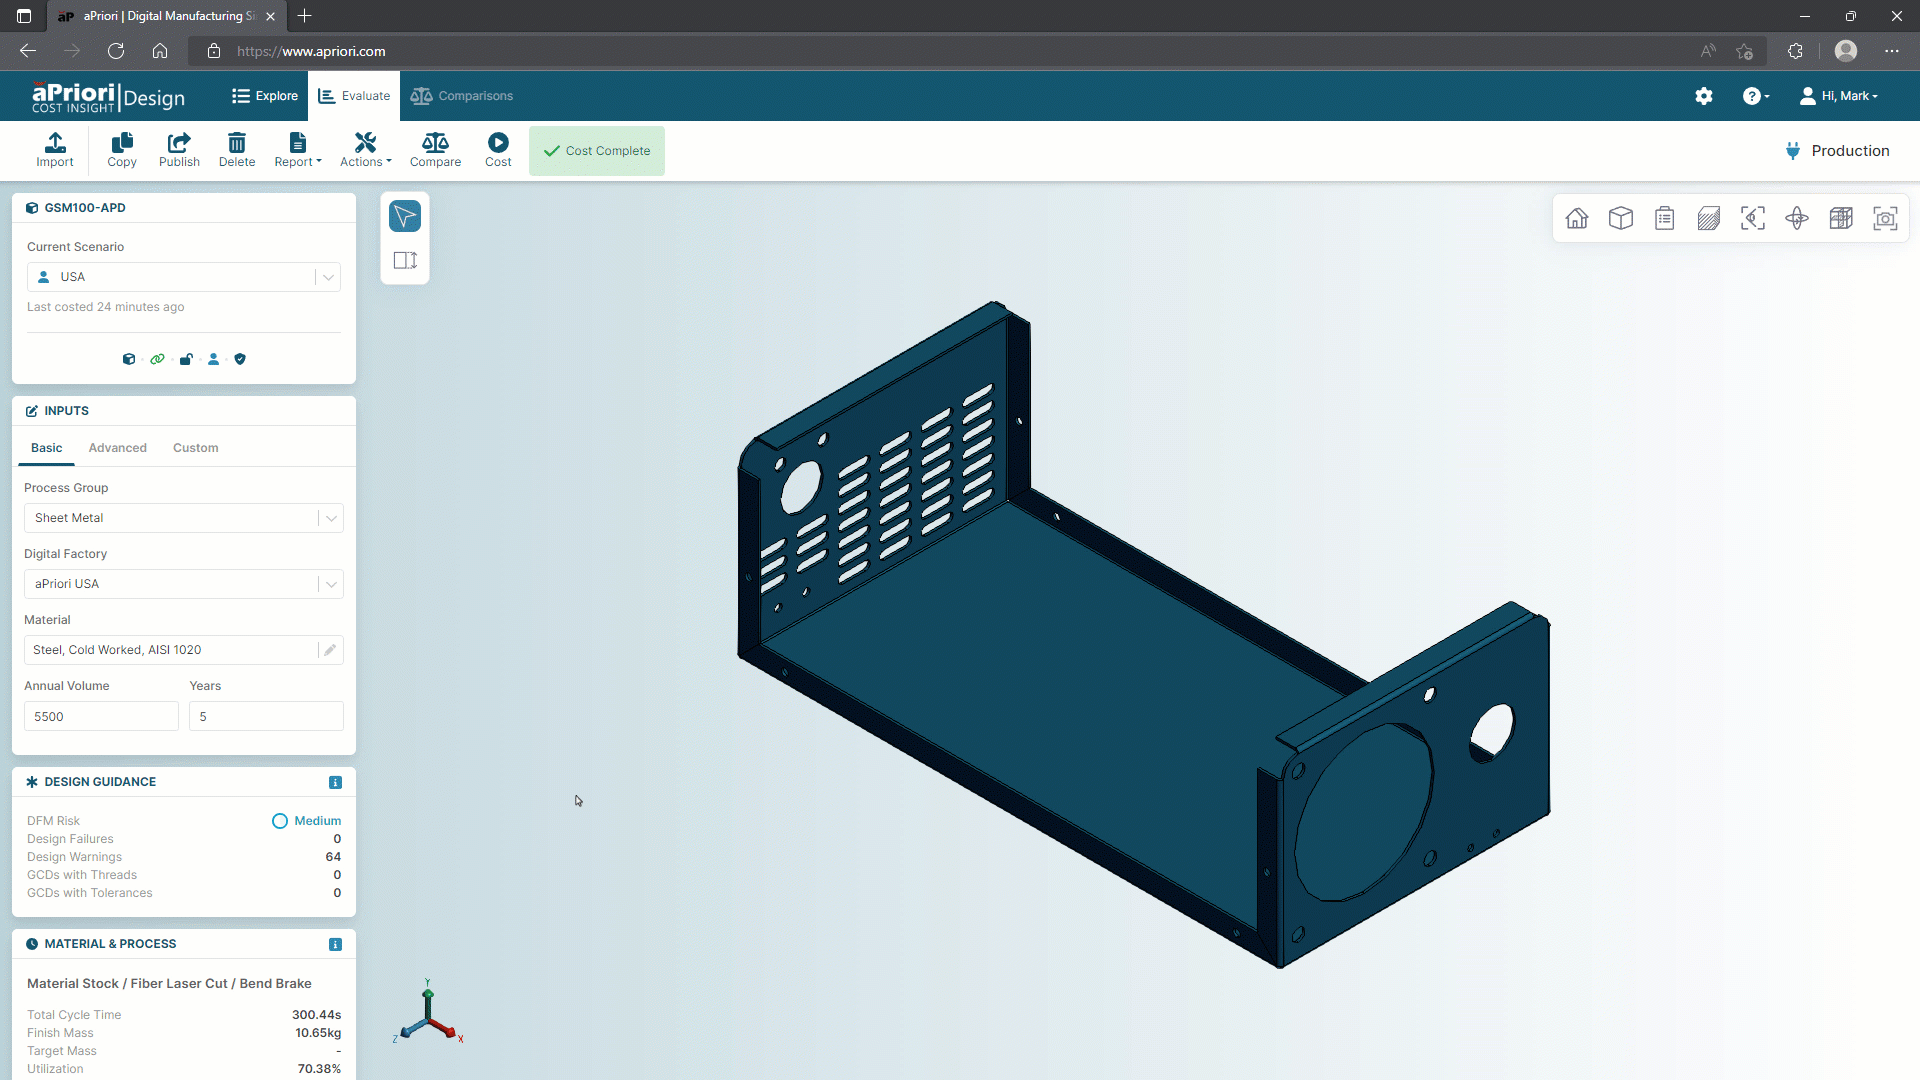 watch how to compare 3d cad designs with apriori